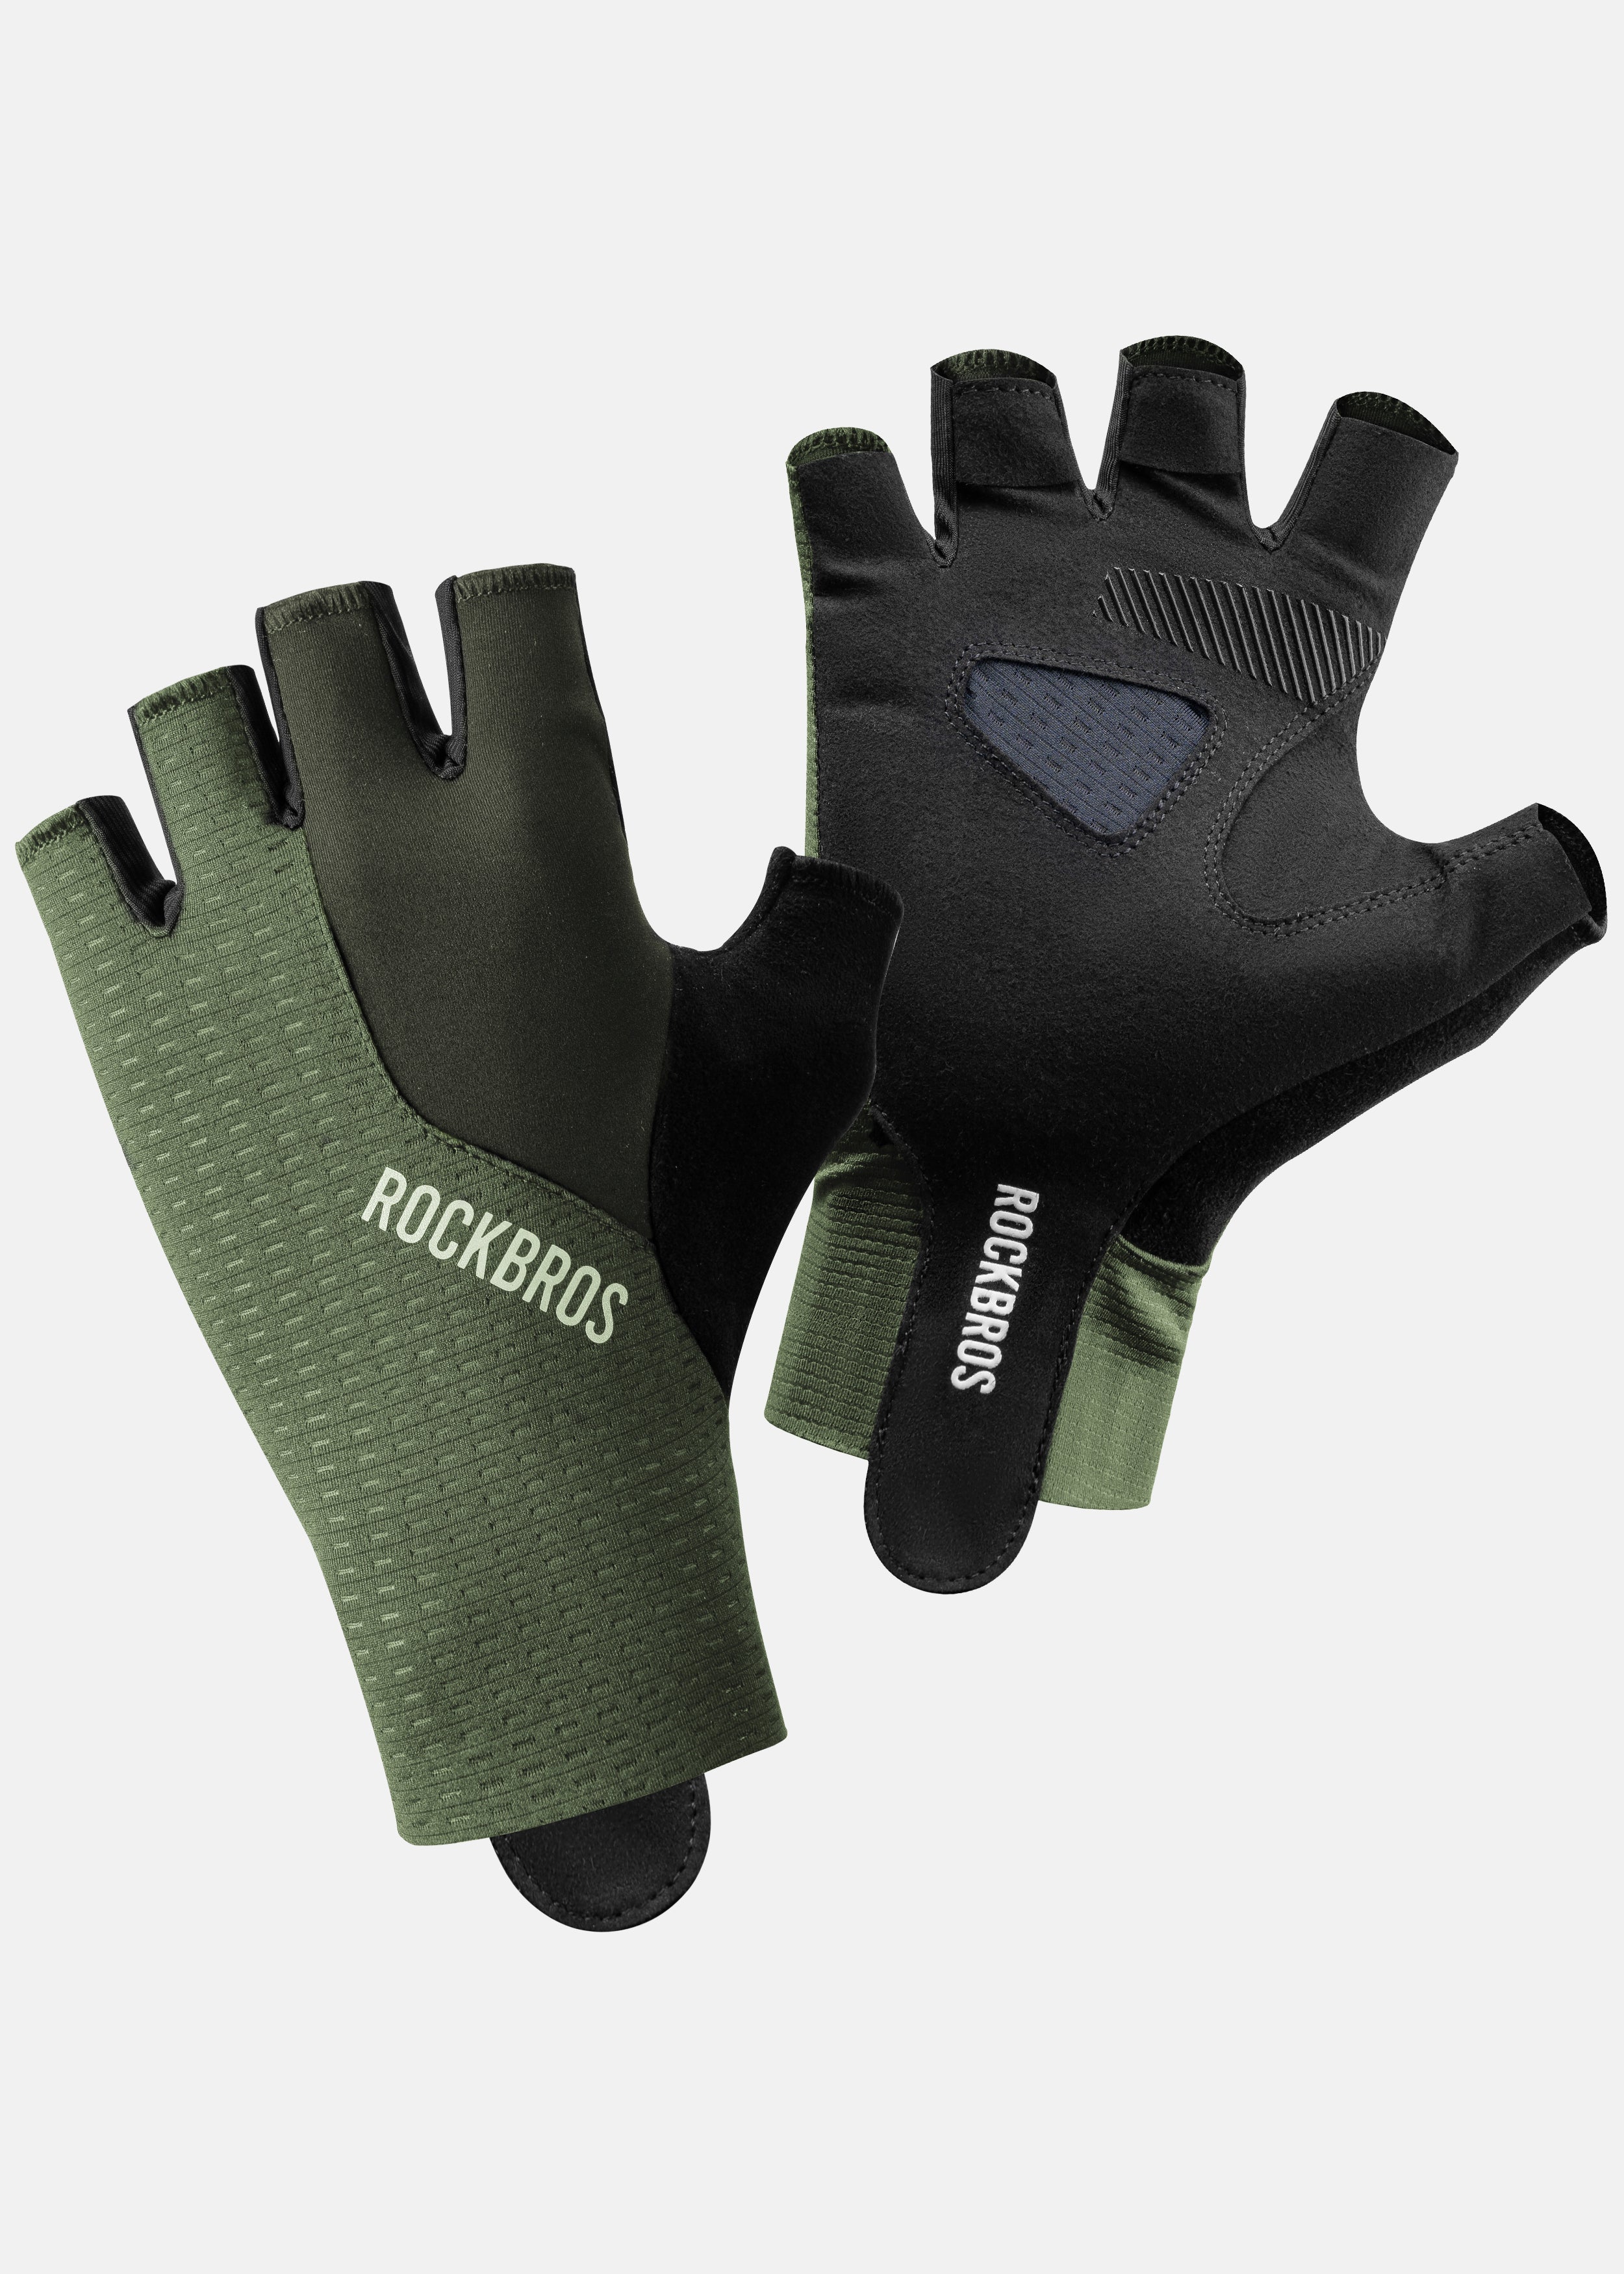 ROCKRBOS Road-to-Sky Cycling Fingerless Gloves #Color_Black Green